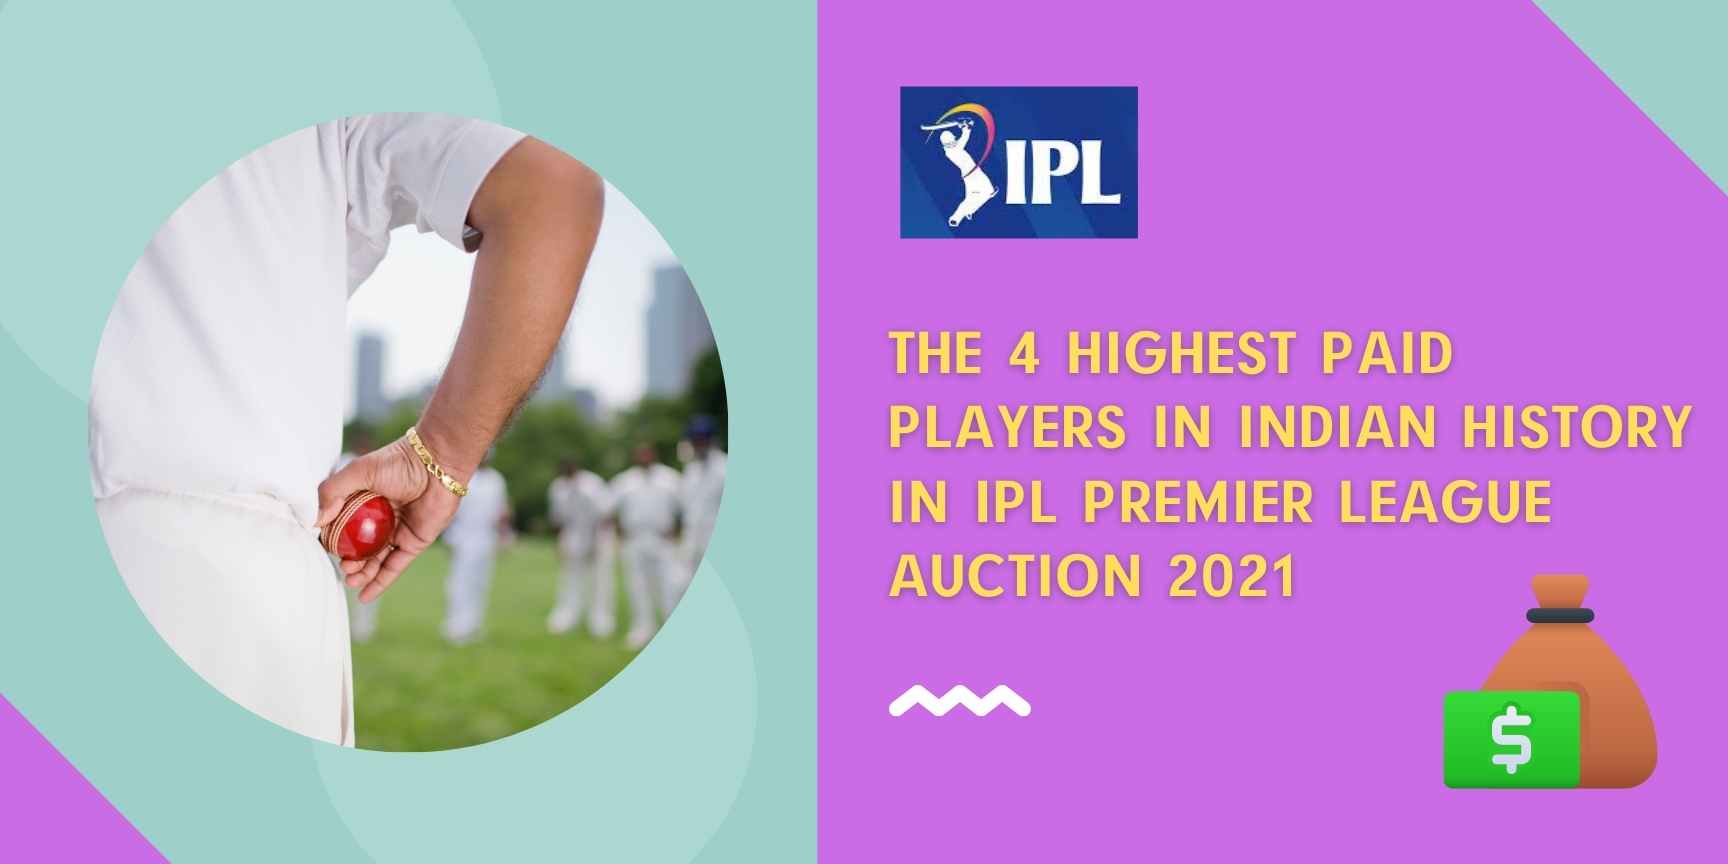 The 4 highest paid players in Indian history  in IPL Premier League Auction 2021